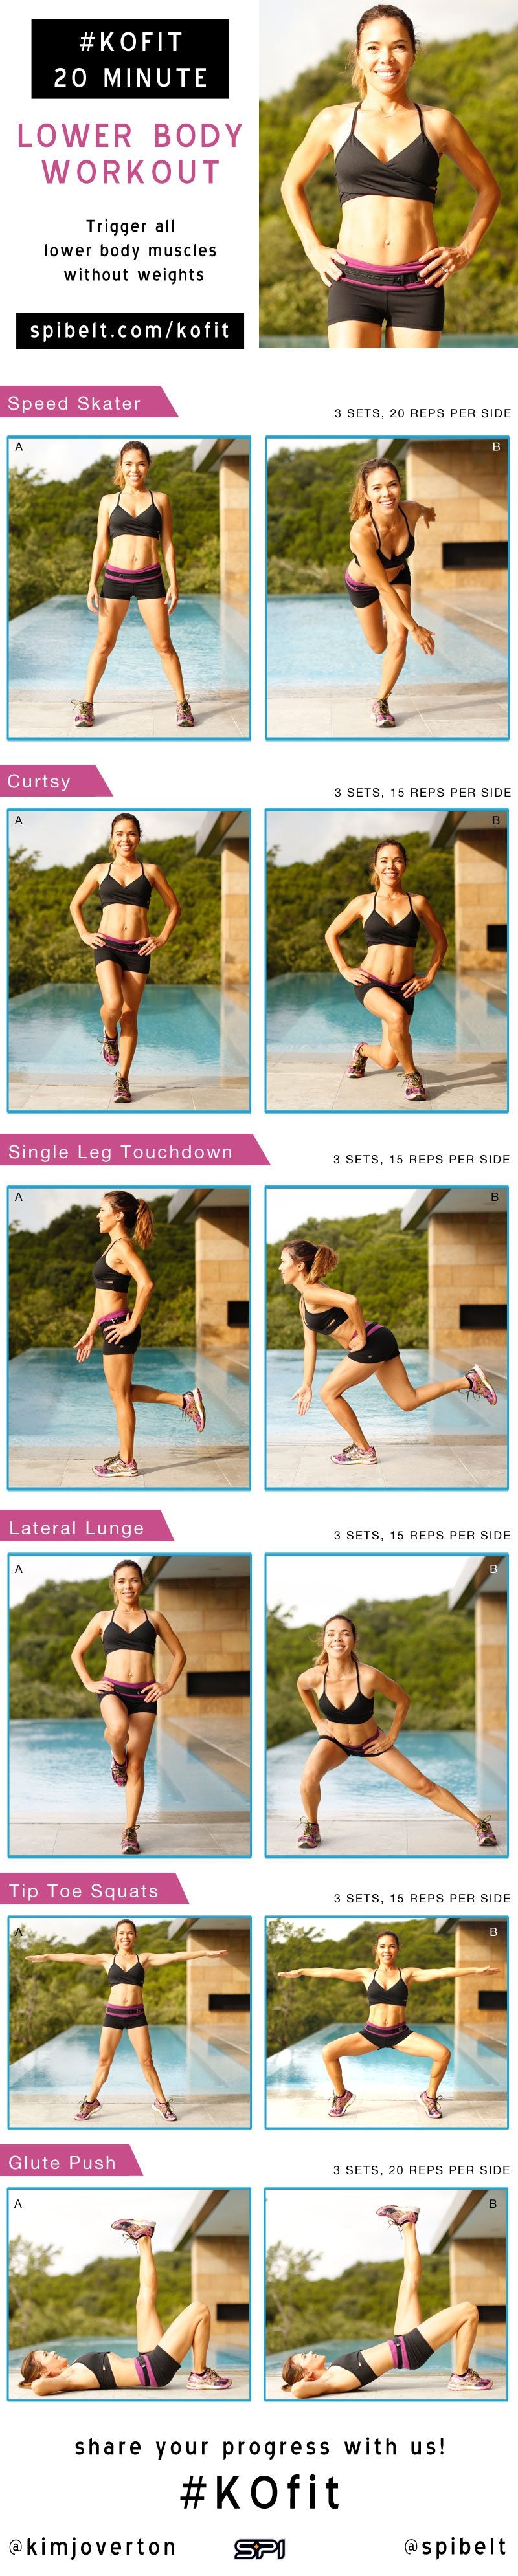 KOfit - 20 minute lower body workout without weights